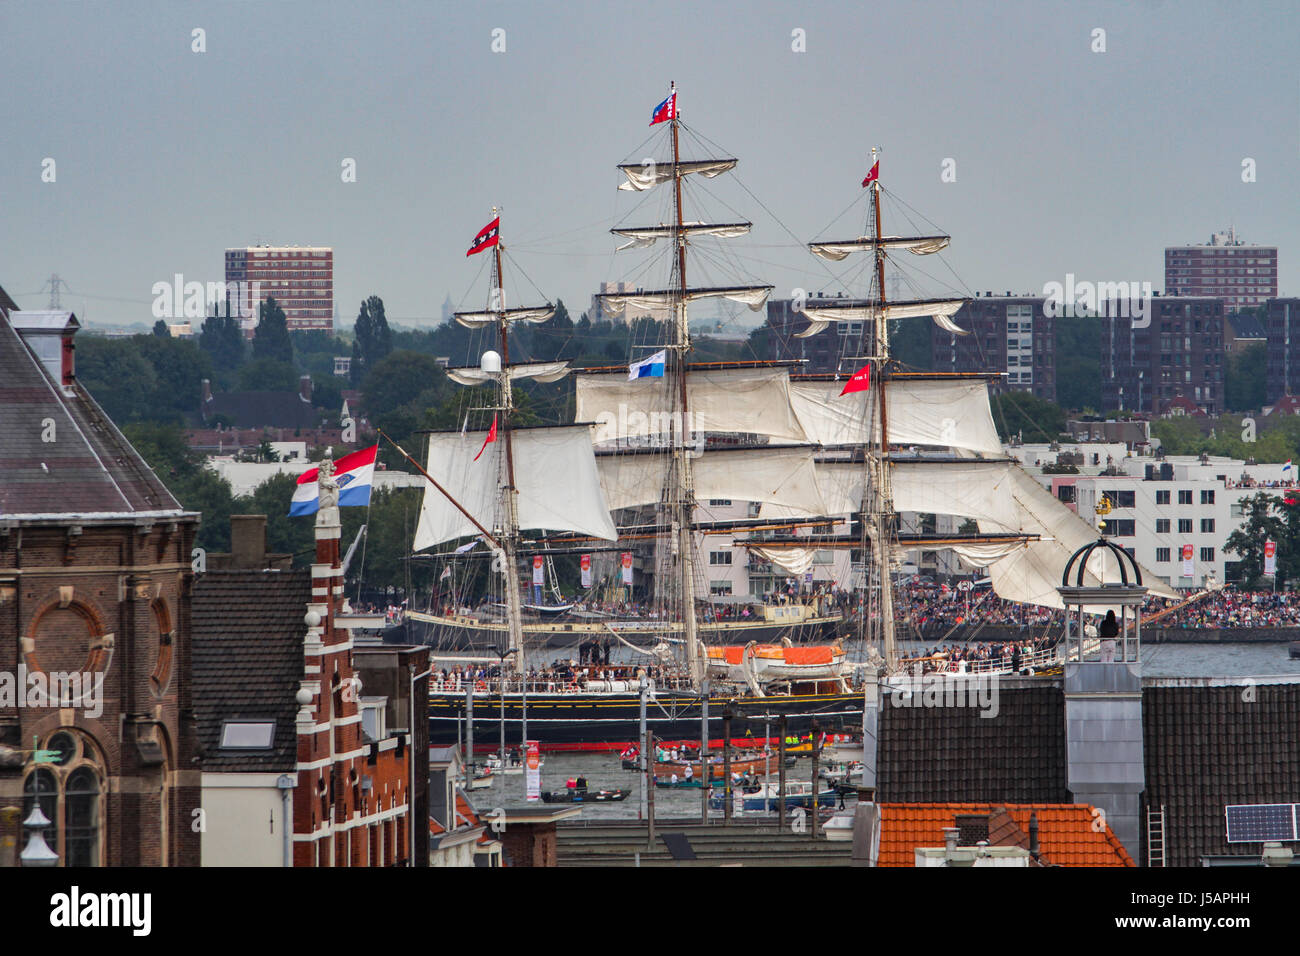 Amsterdam, Netherlands. 19th Aug, 2015. SAIL Amsterdam 2015, Sail In Parade on first day (of 5, 19th to 23th Aug): three-masted clipper Stad Amsterdam (city of Amsterdam), Netherlands. SAIL Amsterdam is a quinquennial maritime event in Amsterdam in the Netherlands. Tall ships from all over the world visit the city to moor in its eastern harbour. - Fotocredit: Christian Lademann Stock Photo